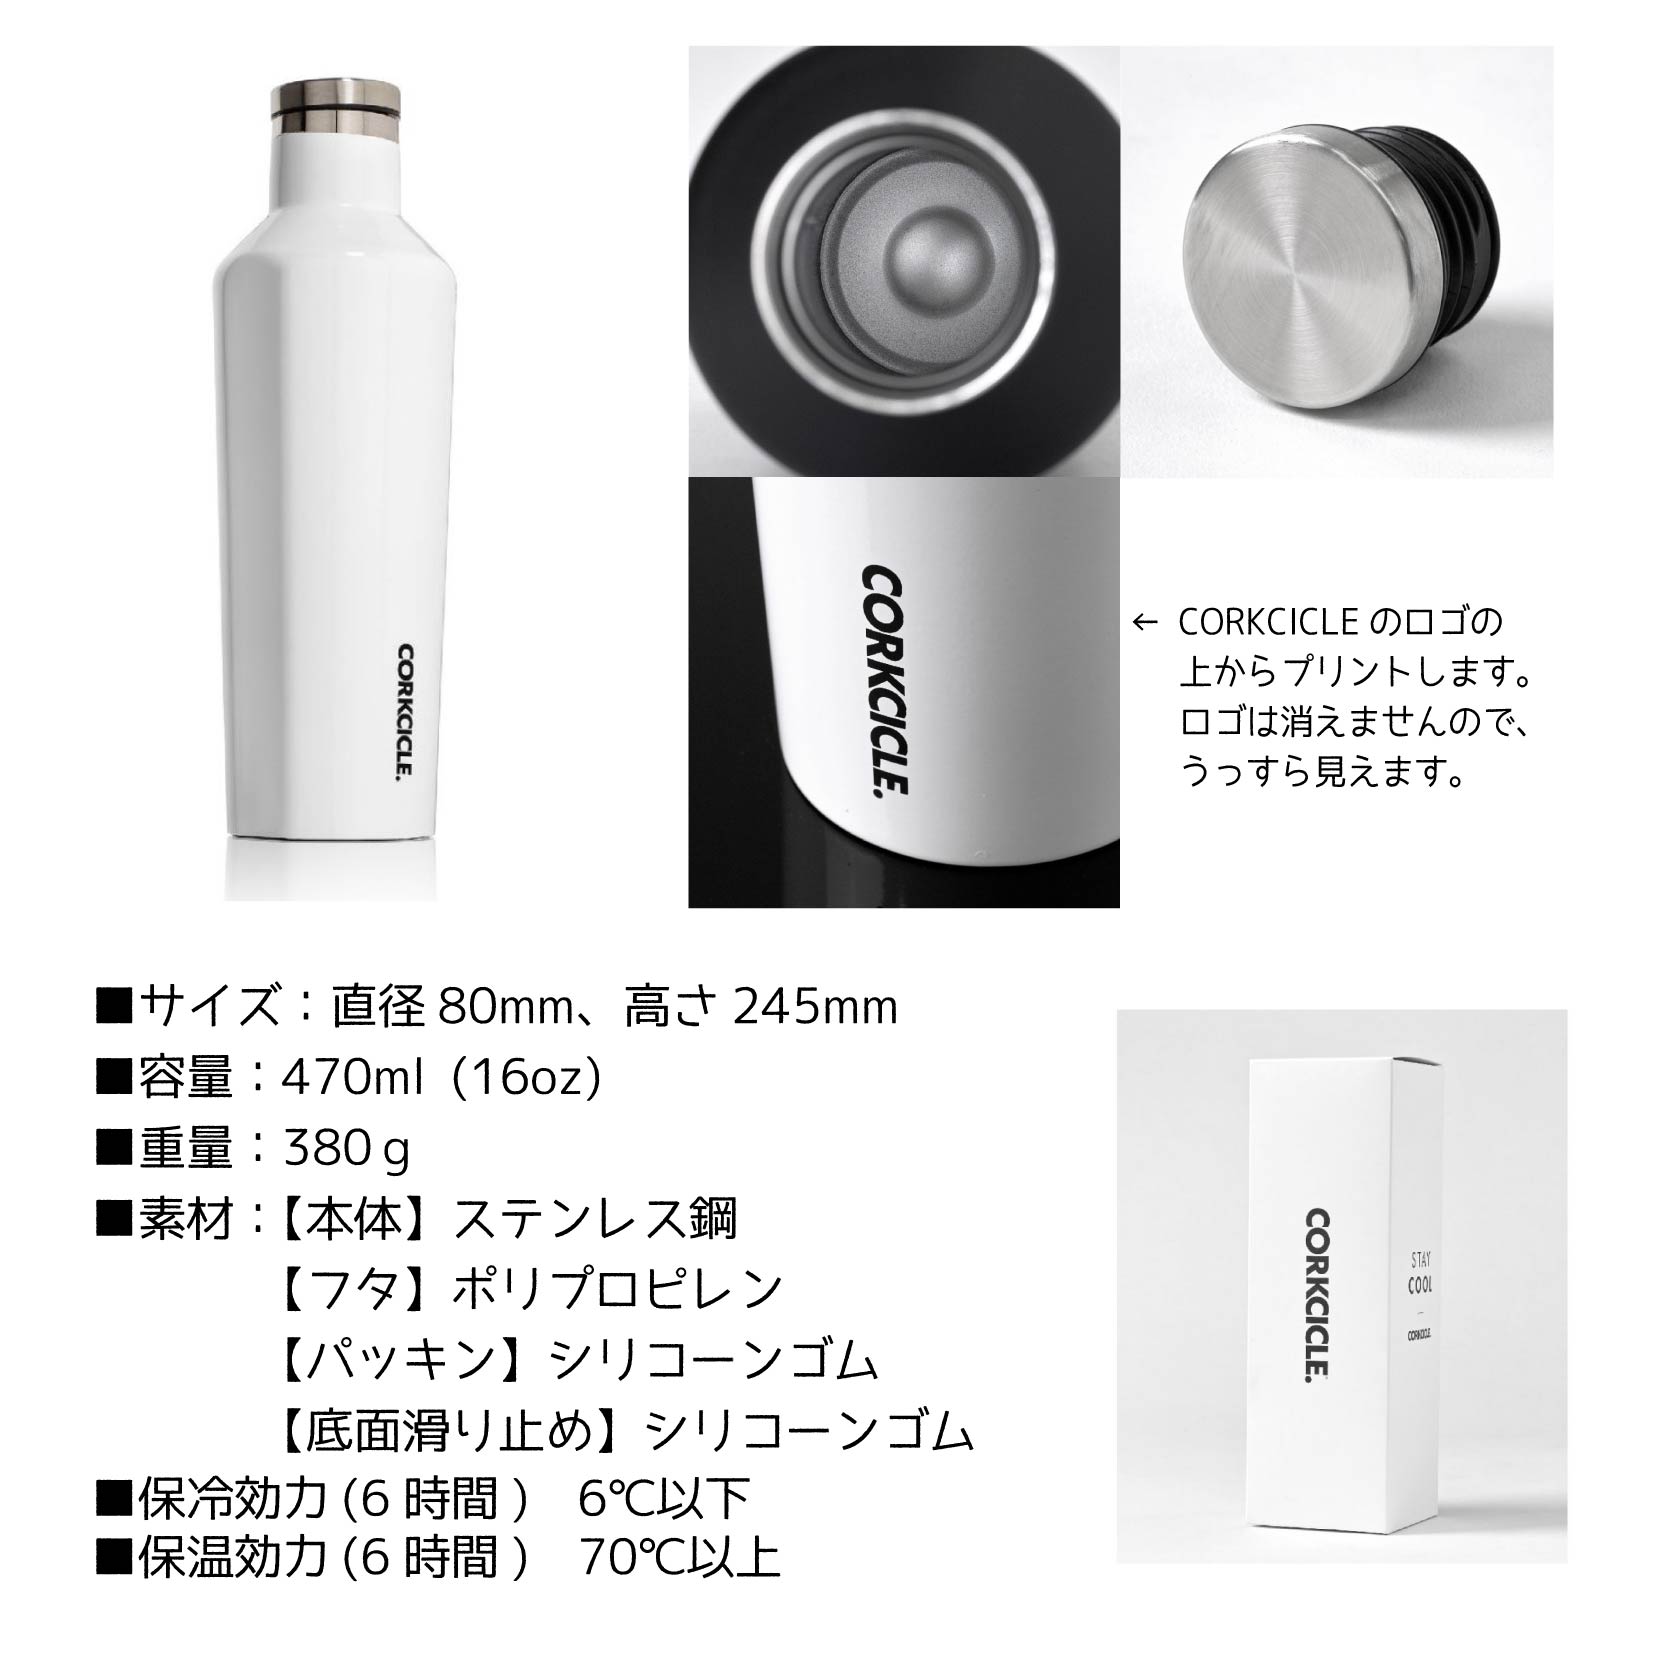 CORKCICLE<br>水筒 470ml<br>CANTEEN 16oz